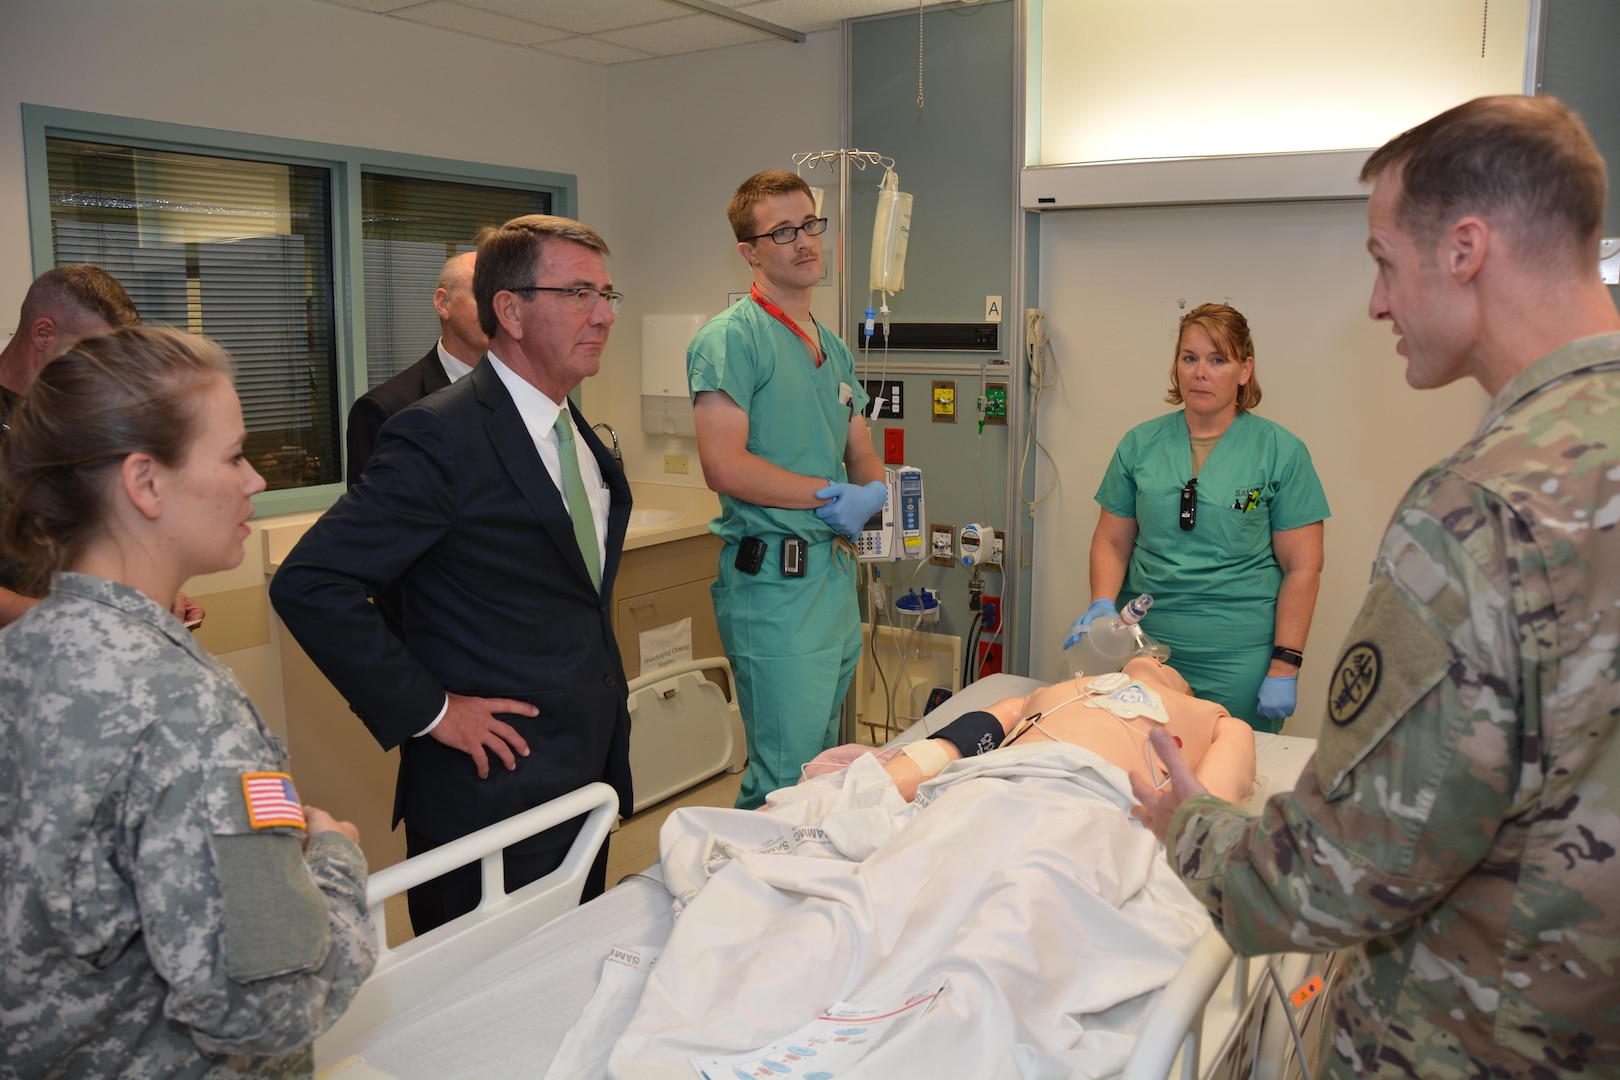 Secretary of Defense Ash Carter and U.S. Army Lt. Col. Matthew Borgman discuss wireless transmission of CPR using a mannequin simulator during his November 16 visit to Brooke Army Medical Center, Fort Sam Houston, Texas. BAMC is the Army’s largest and busiest medical center. Secretary Carter personally thanked wounded and ill warriors, their families and BAMC staff for their service and sacrifice. Secretary Carter toured labs and simulation centers pioneering new advances in diagnostic imaging and new medical training aids. His visit at BAMC was part of a tour of Joint Base San Antonio, with stops at JBSA-Lackland and JBSA-Randolph. (U.S. Army photo by Robert Shields/Released)